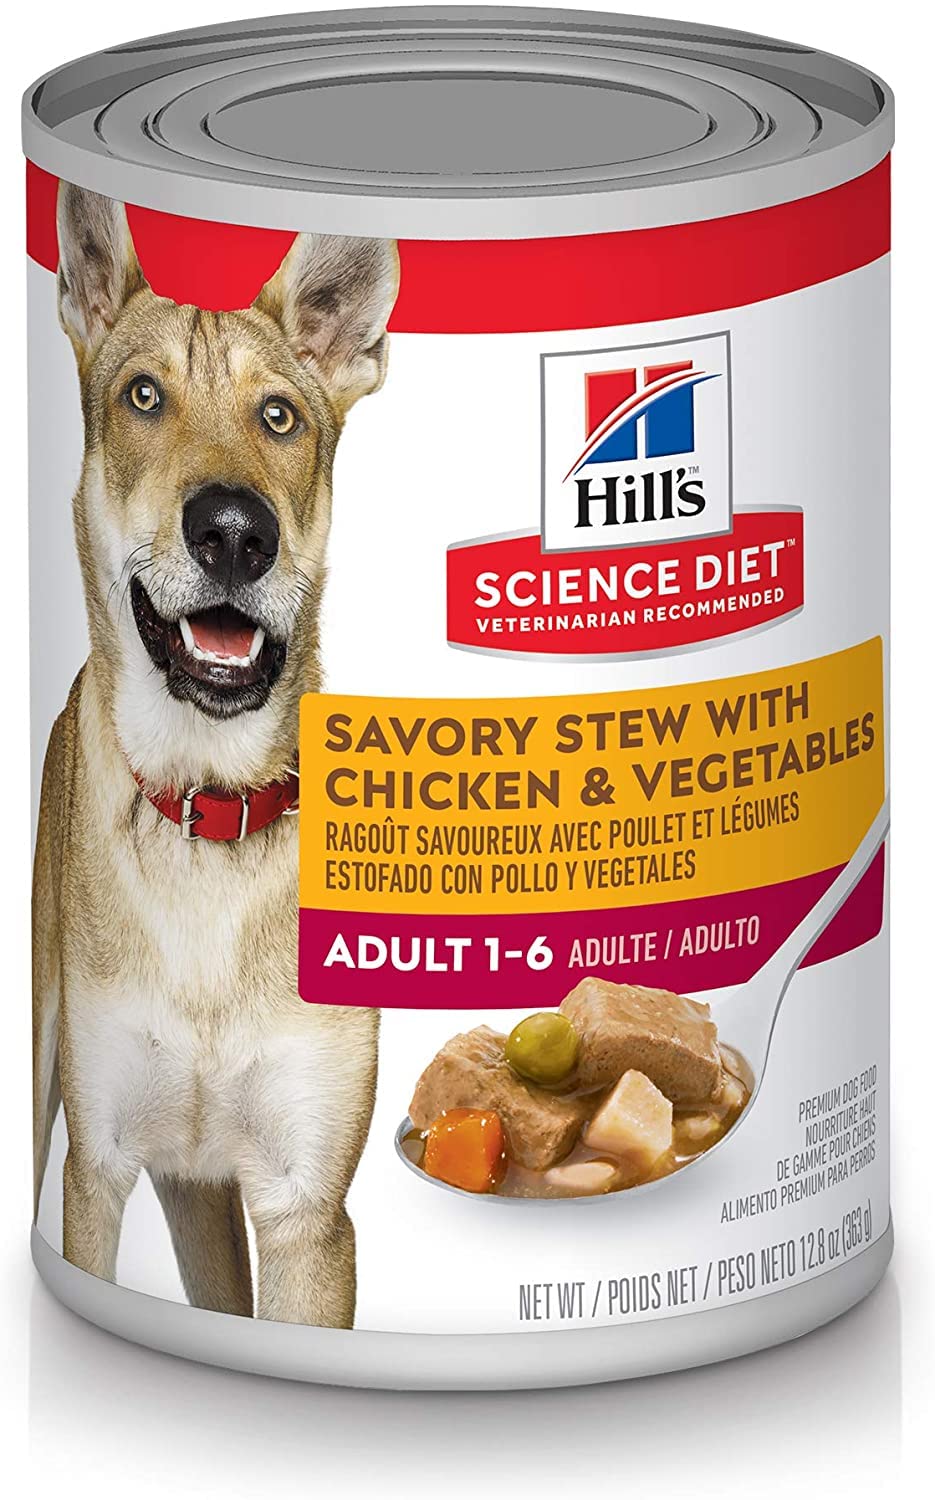 Hill's Science Diet  Canned dog food..12 Pack 12.8 oz. Cans-$15.79 w/S&S